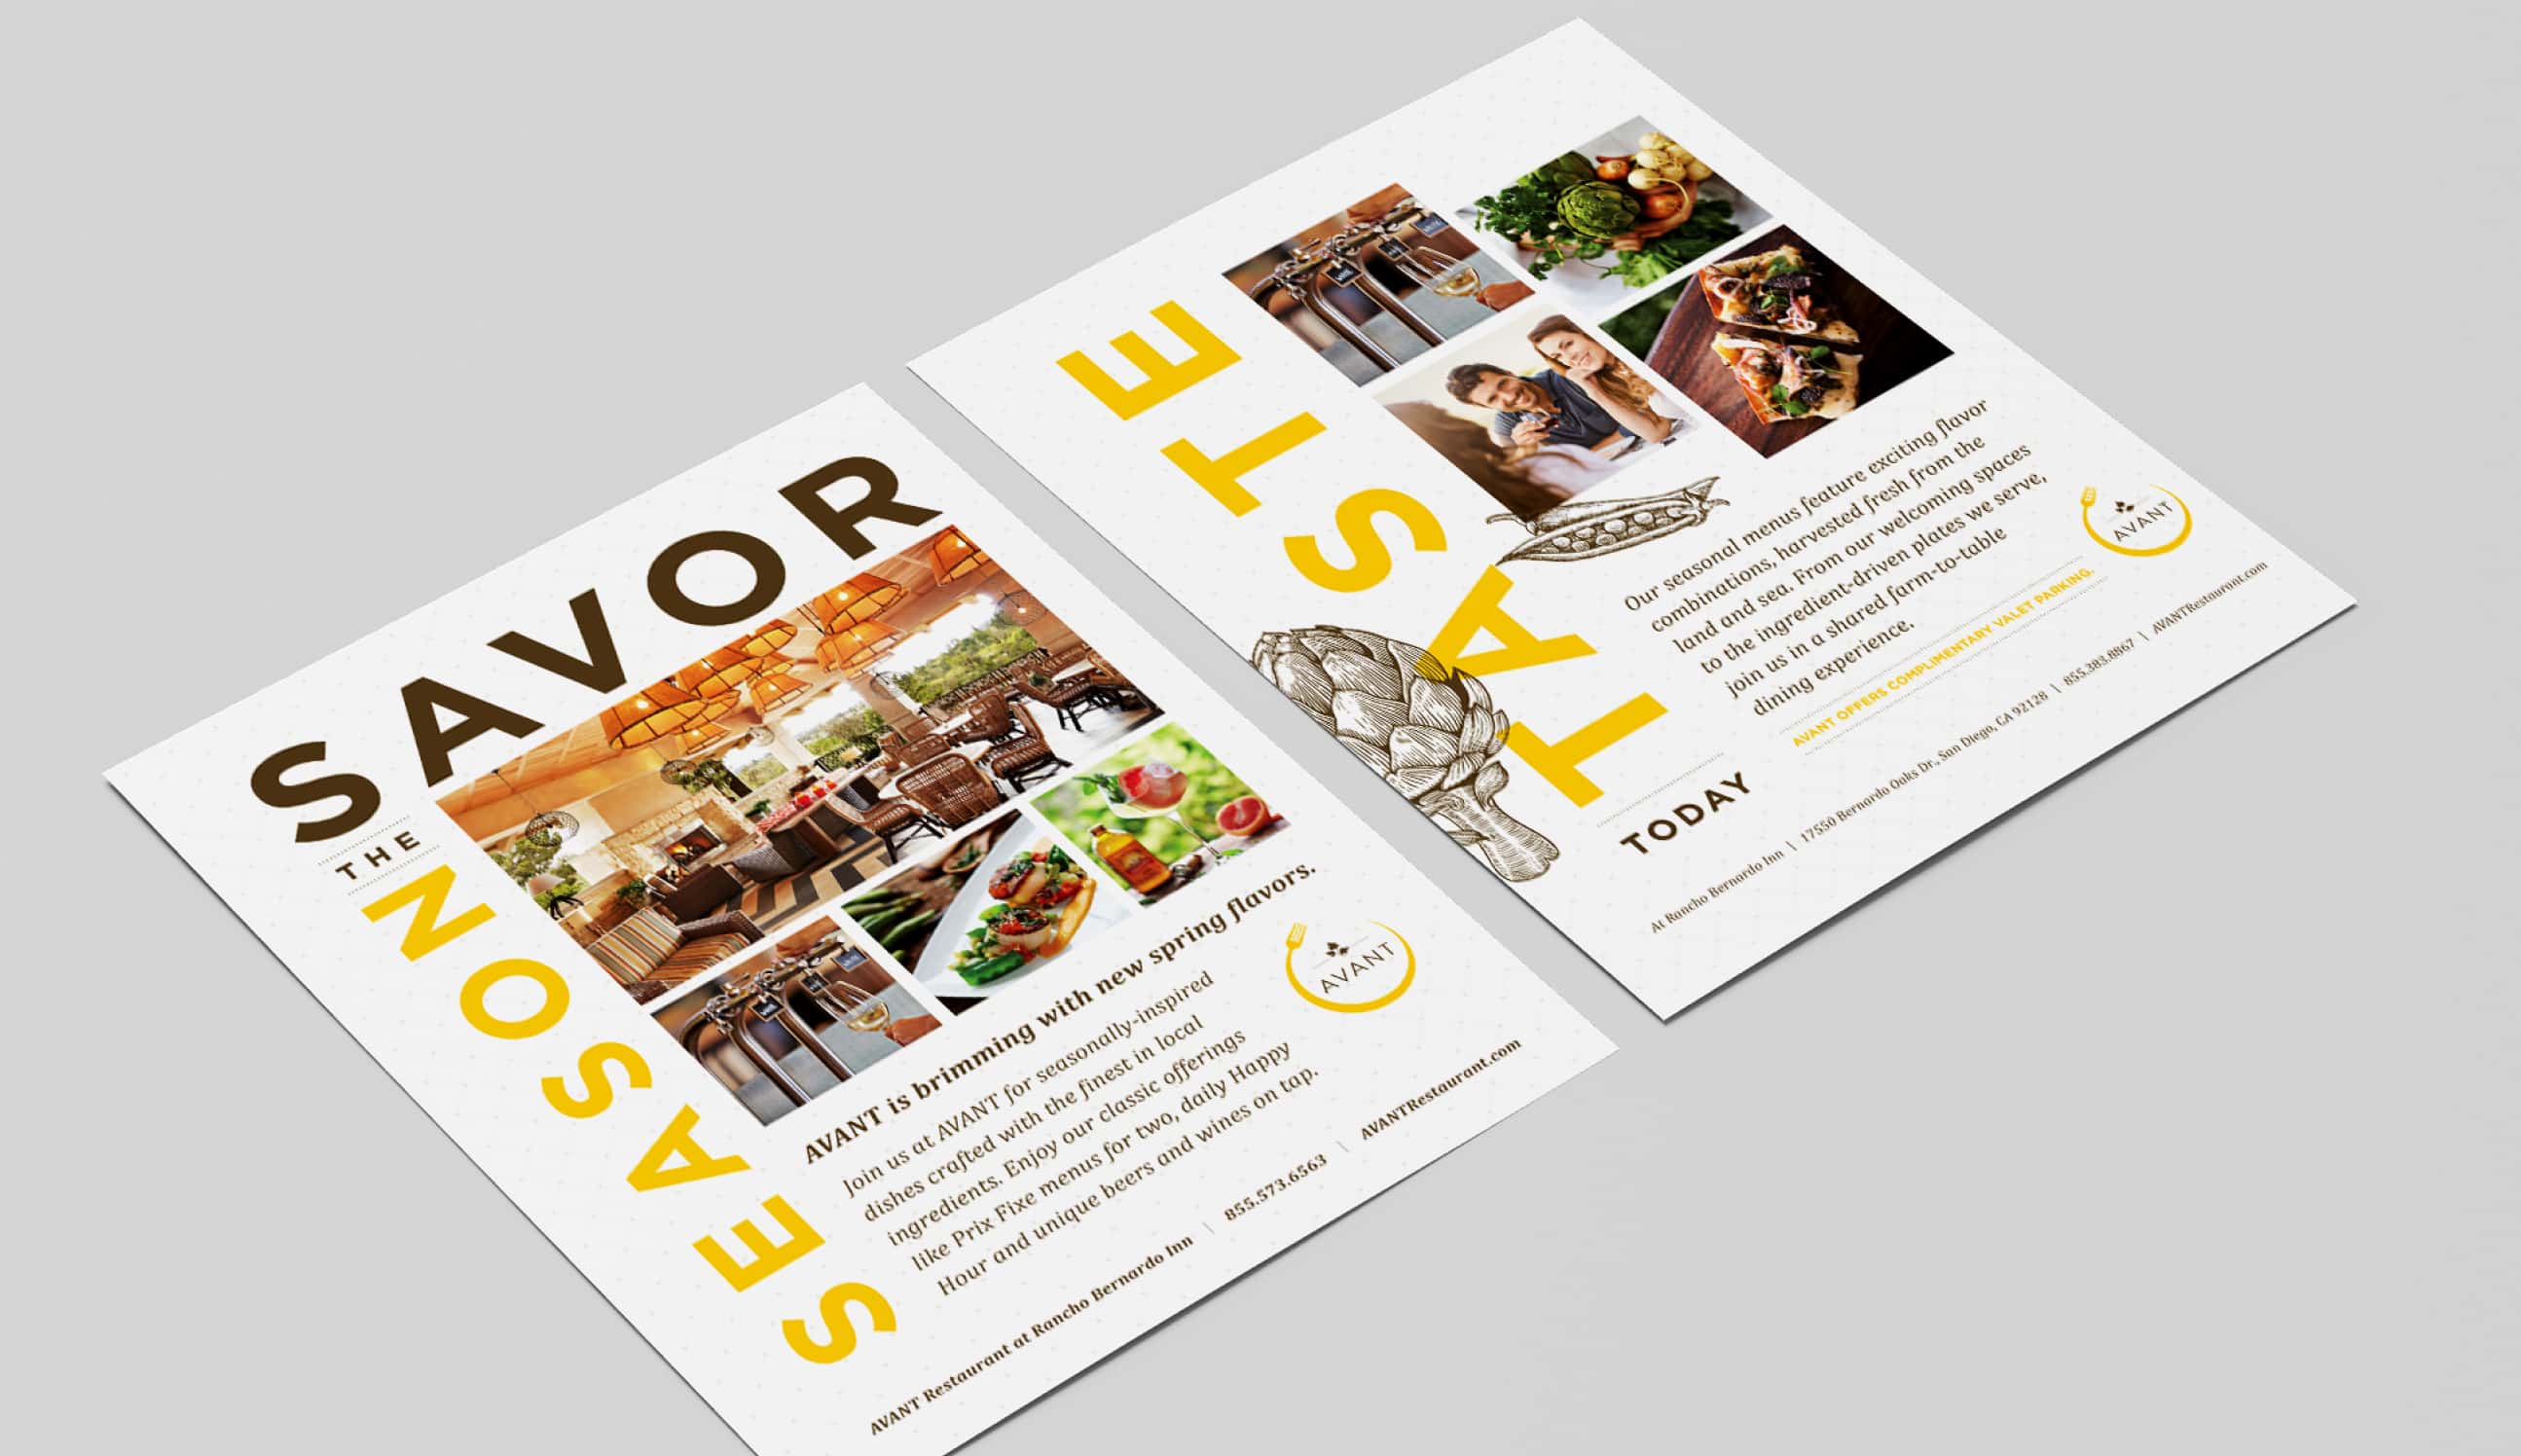 A laid out print advertisement or flyer for AVANT, featuring large text 'SAVOR' with images of the restaurant's interior, food, and patrons enjoying meals, and text inviting readers to experience dining and special offers.